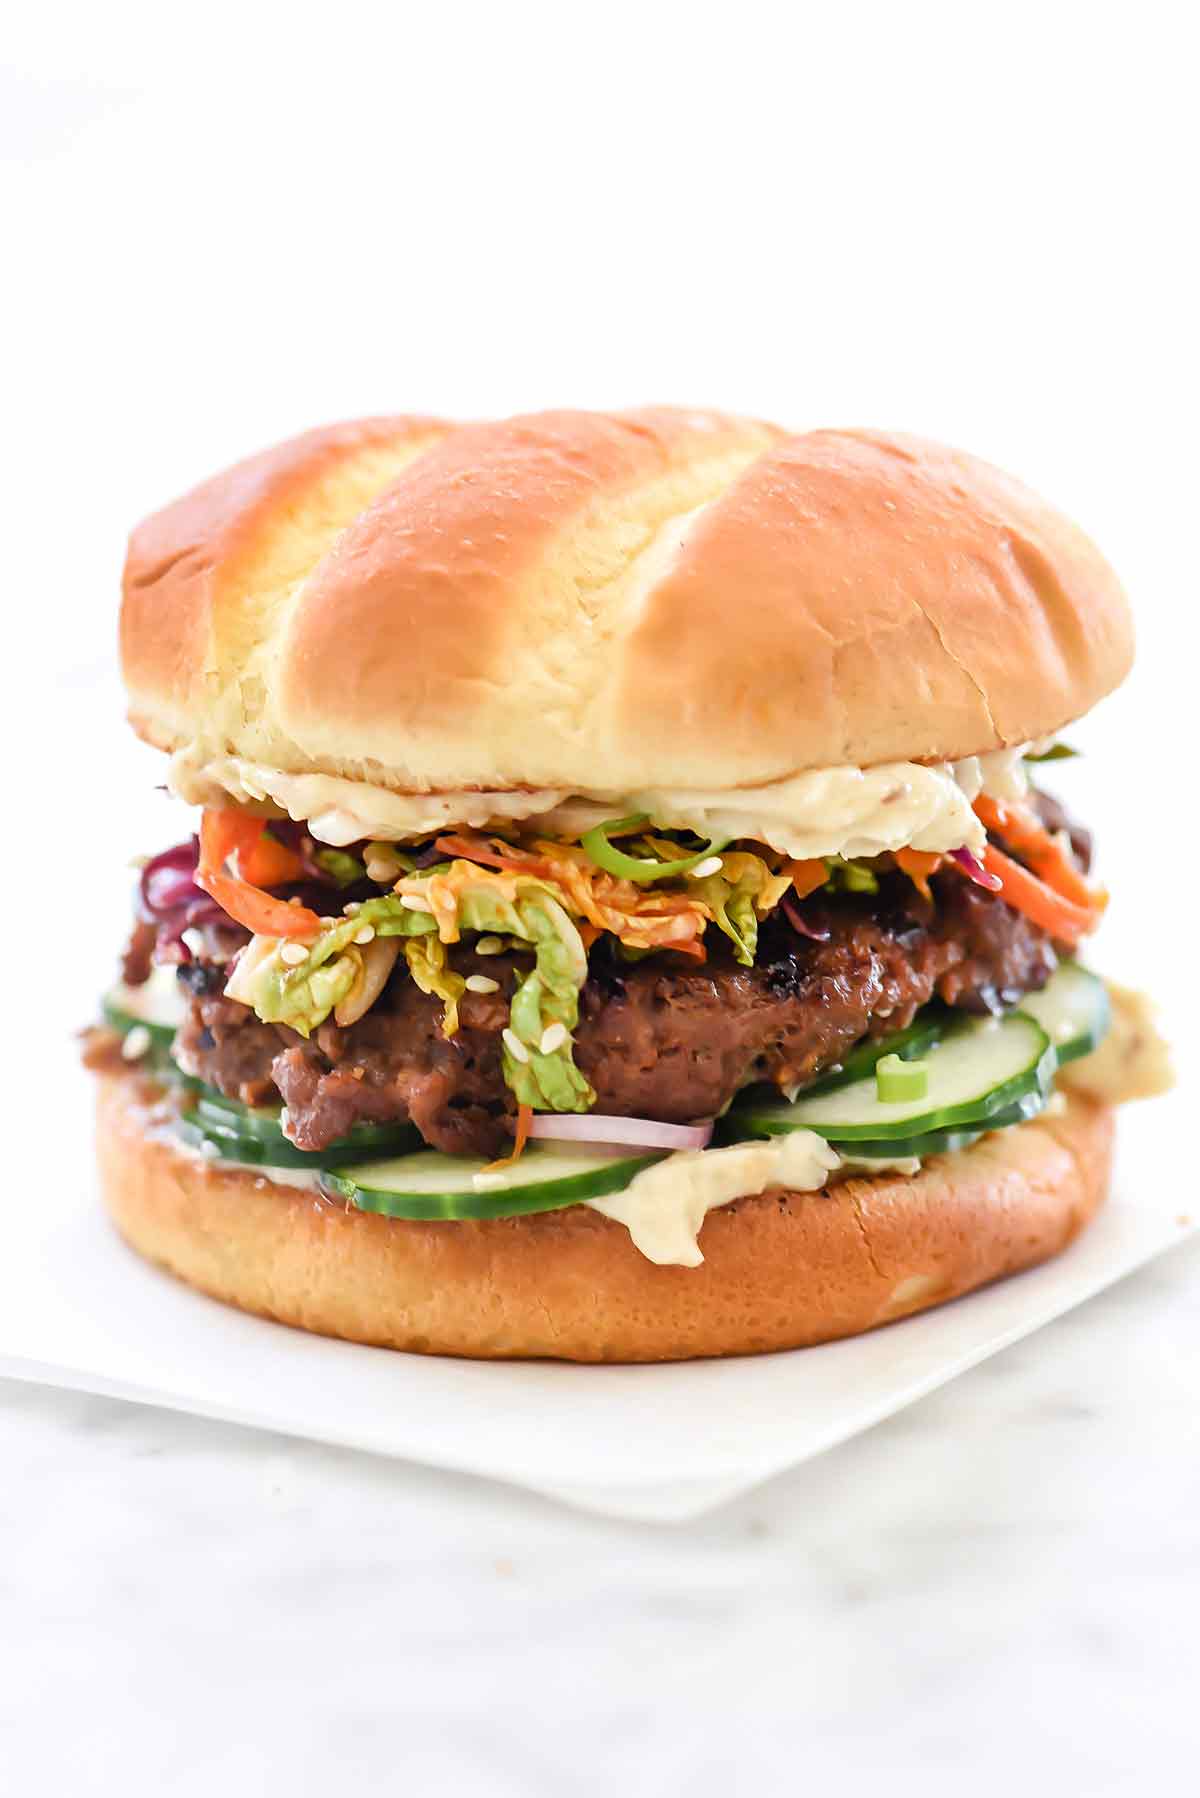 Grill-Worthy Burgers Indoors